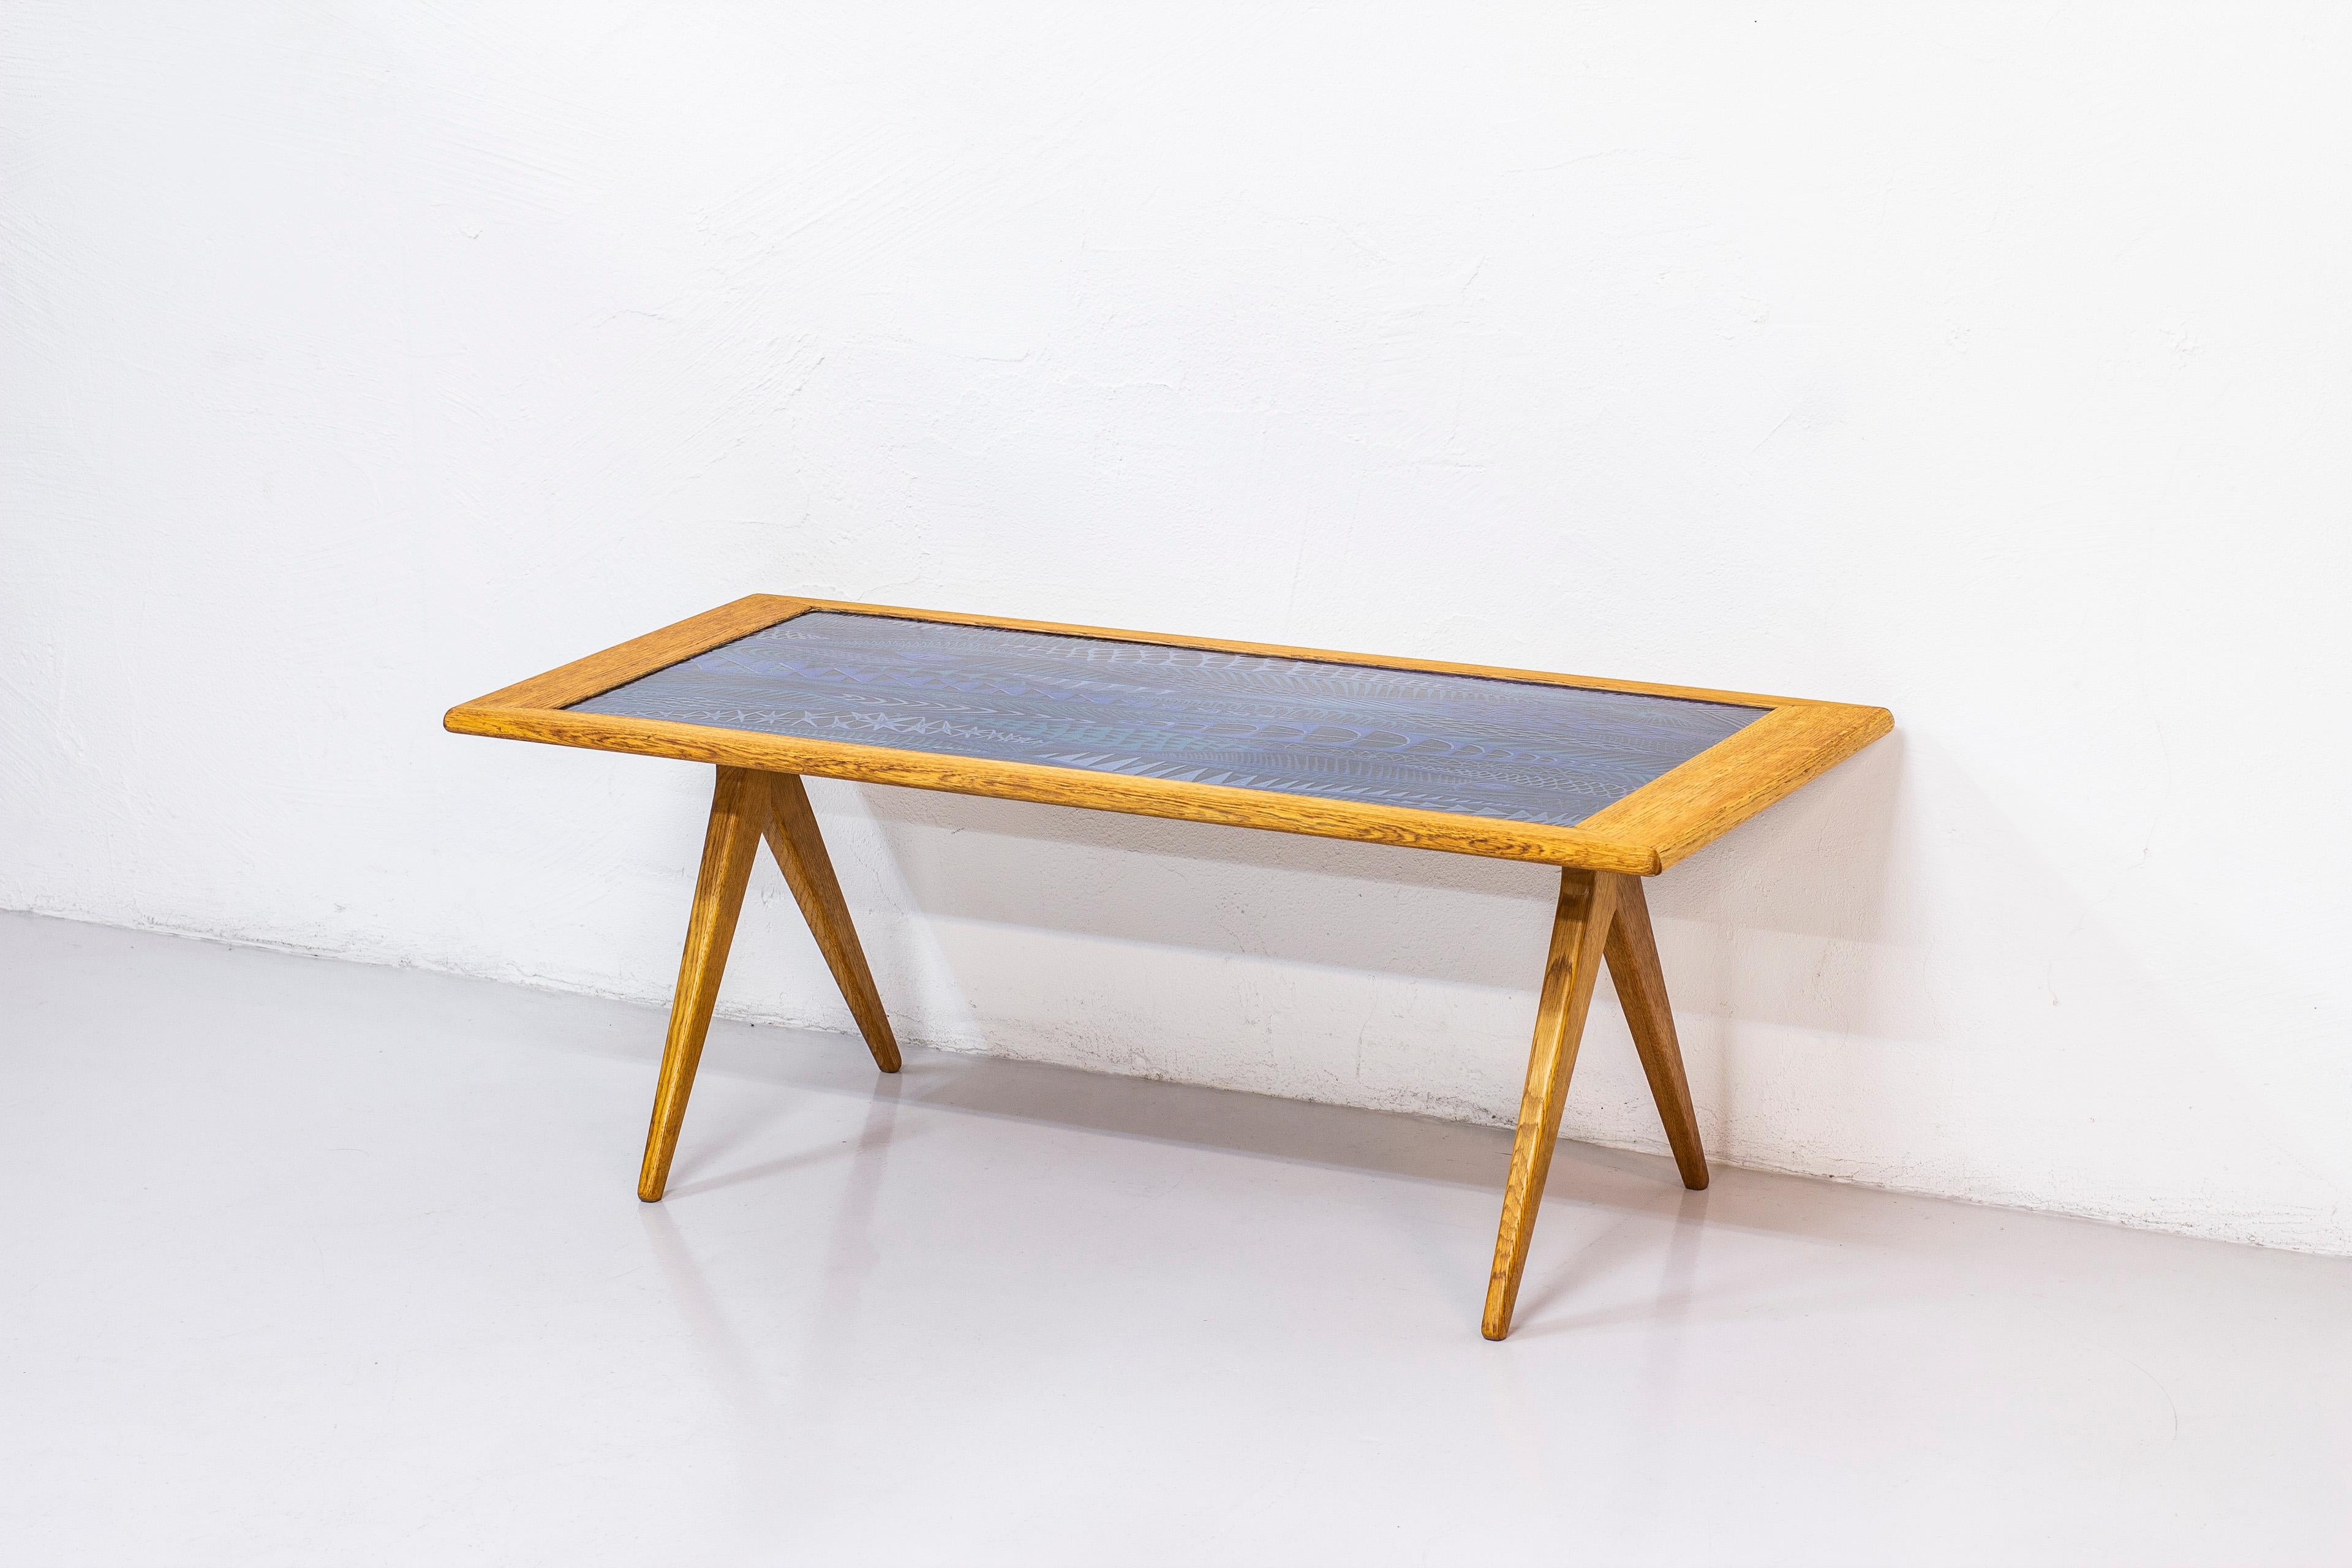 Sofa/occasional table designed by David Rosén and produced by Nordiska Kompaniet, NK. Made from solid oak with brass details and enamel surface designed by Stig Lindberg. The enamel plate was produced by Gustavsberg in their bathtub factory. Signed